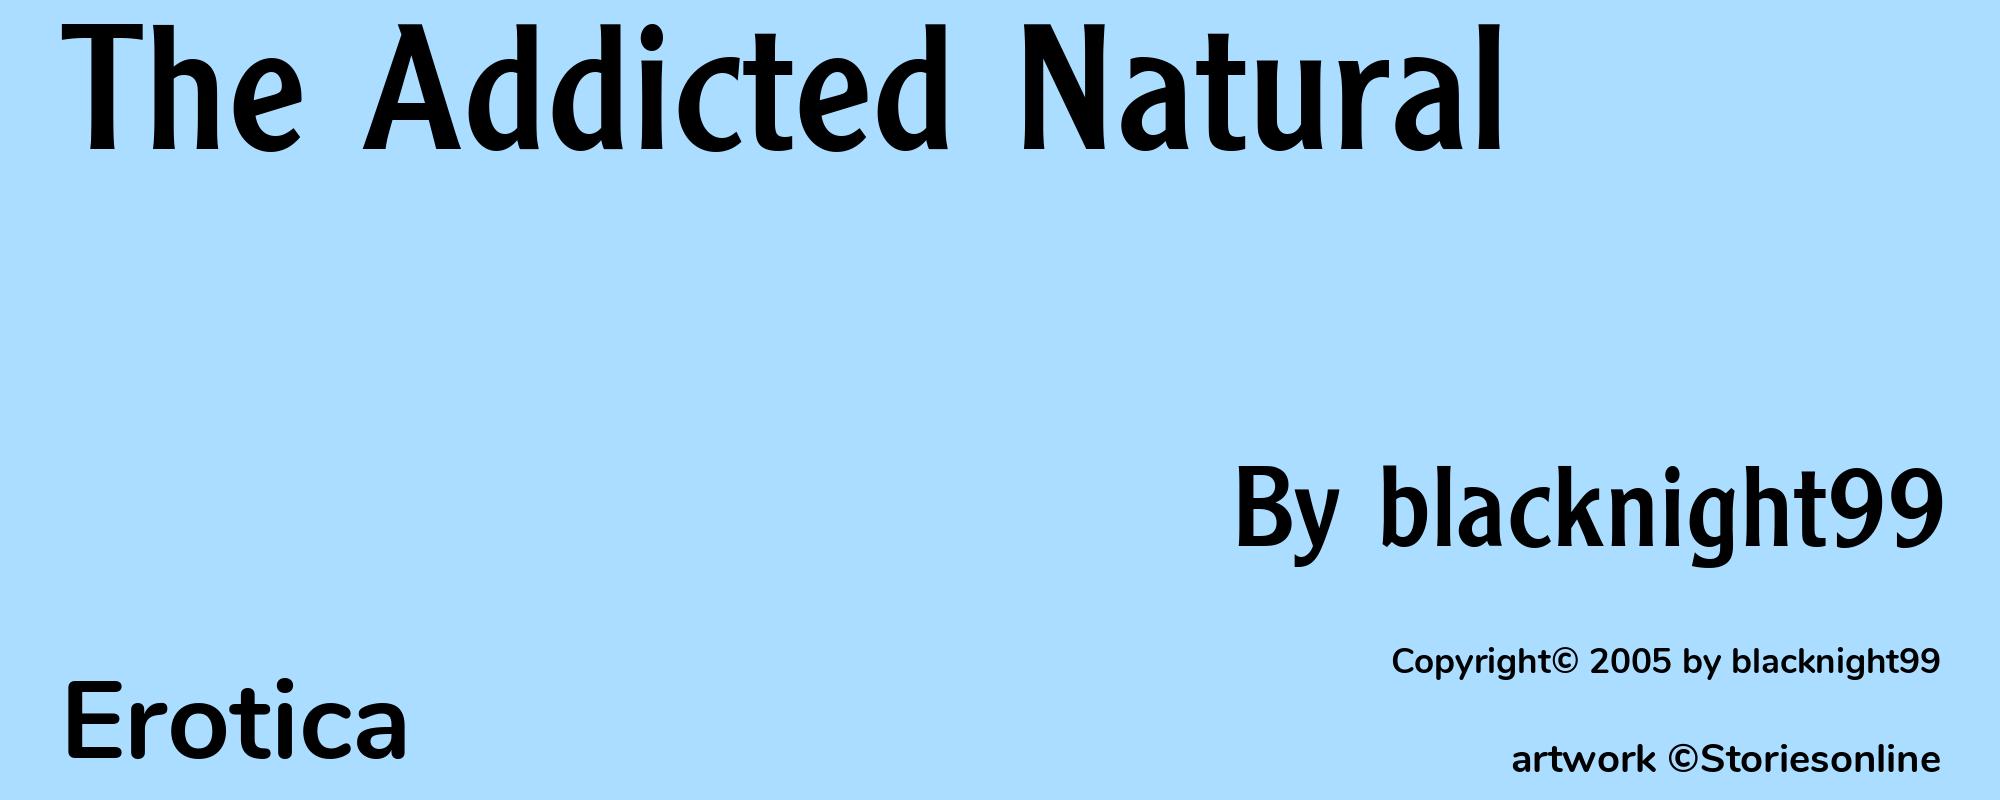 The Addicted Natural - Cover